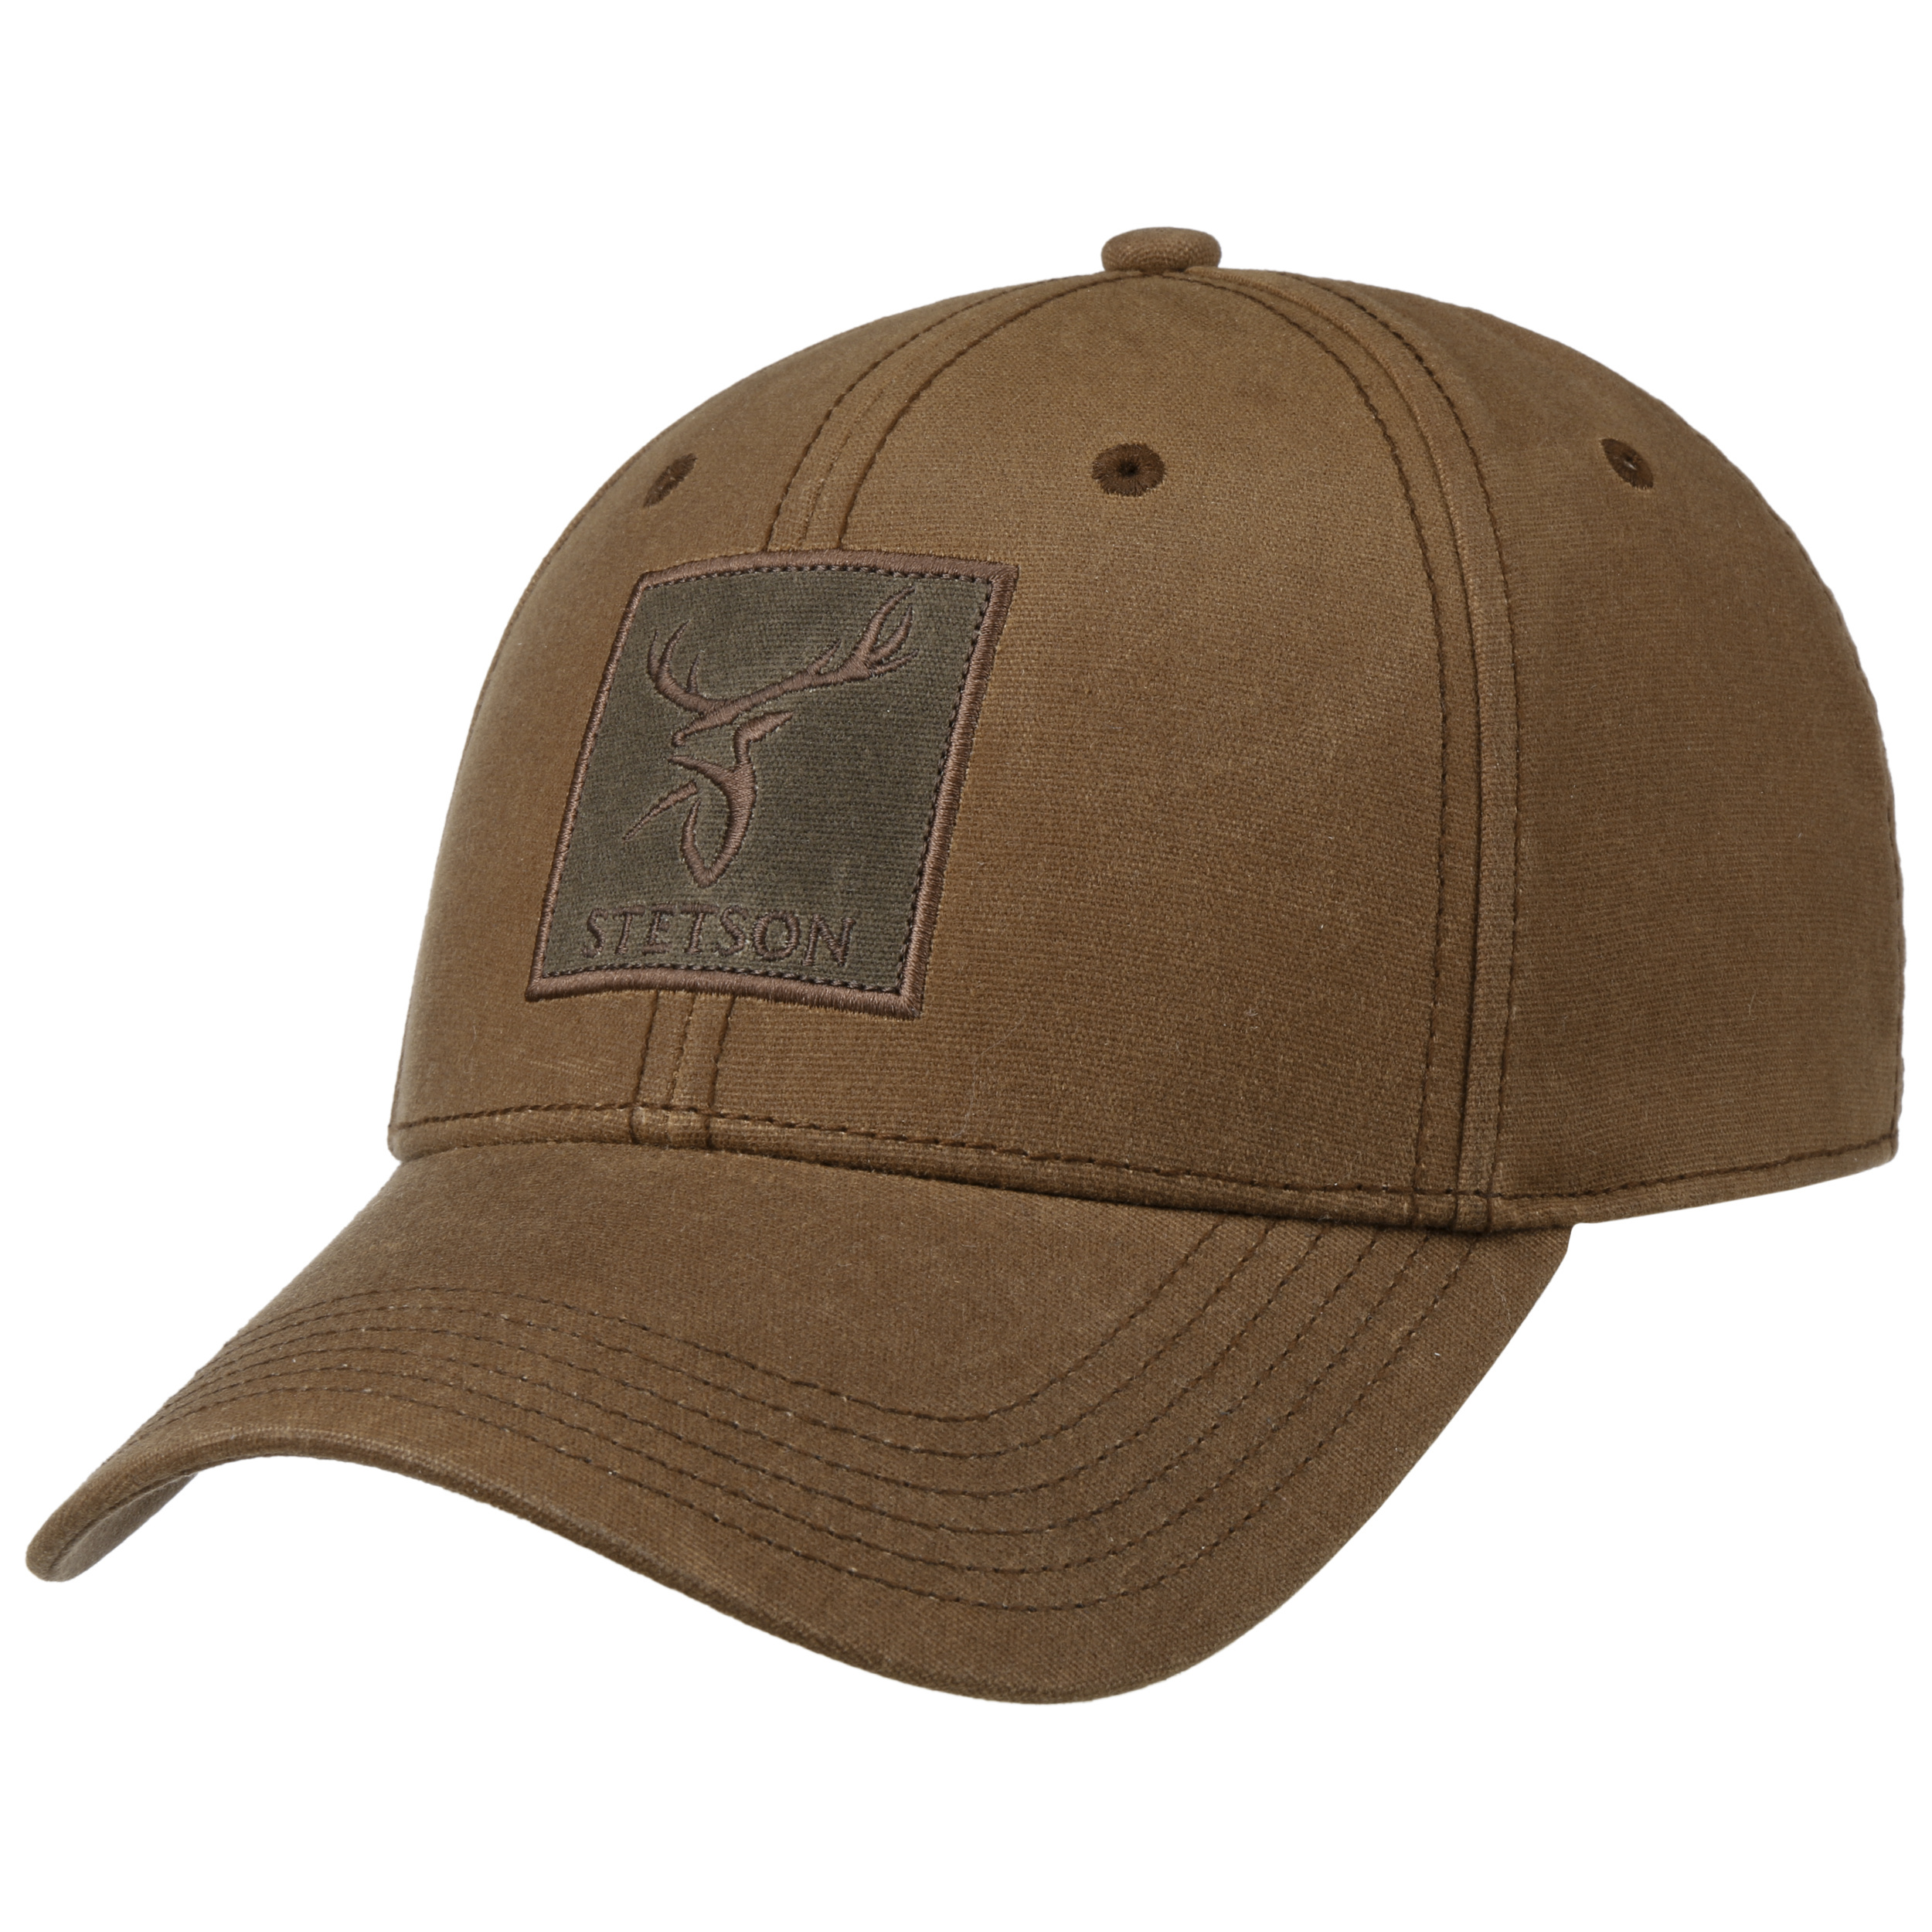 Casquette Vintage Wax Deer by Stetson - 49,00 €